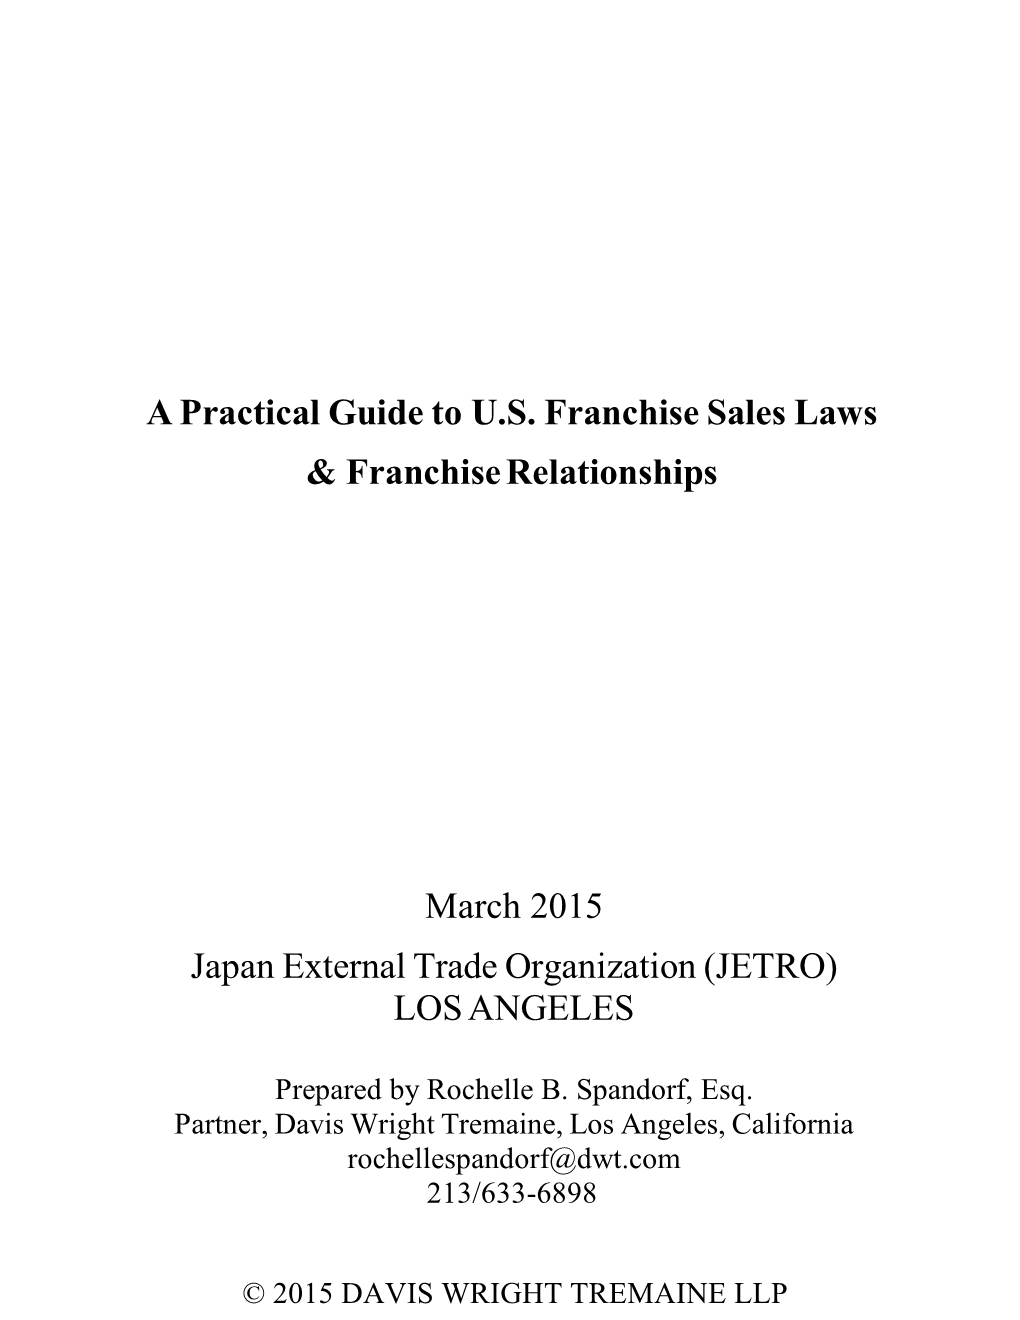 A Practical Guide to U.S. Franchise Sales Laws & Franchise